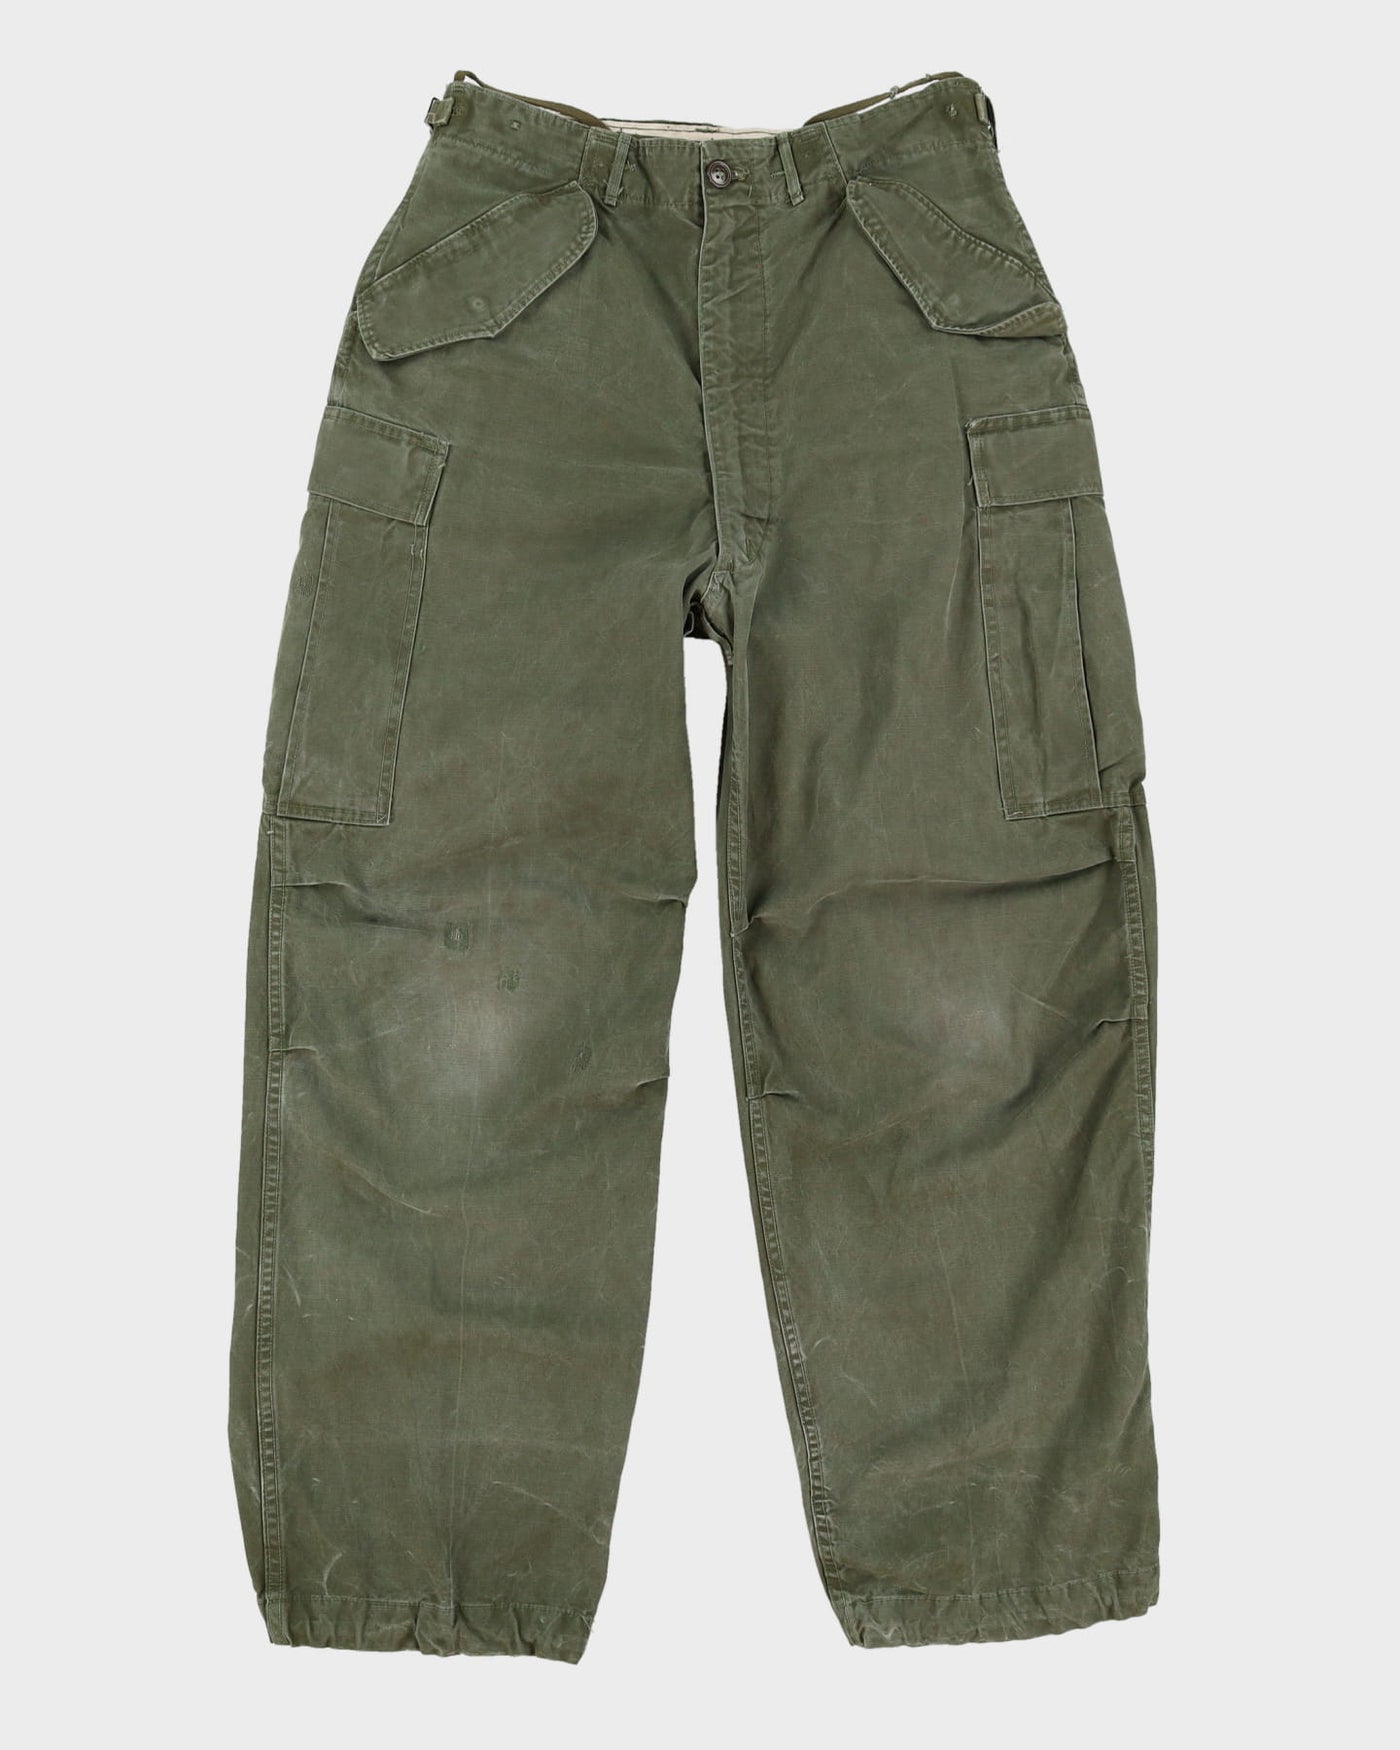 1950s Vintage US Army M1951 Field Trousers 30x28